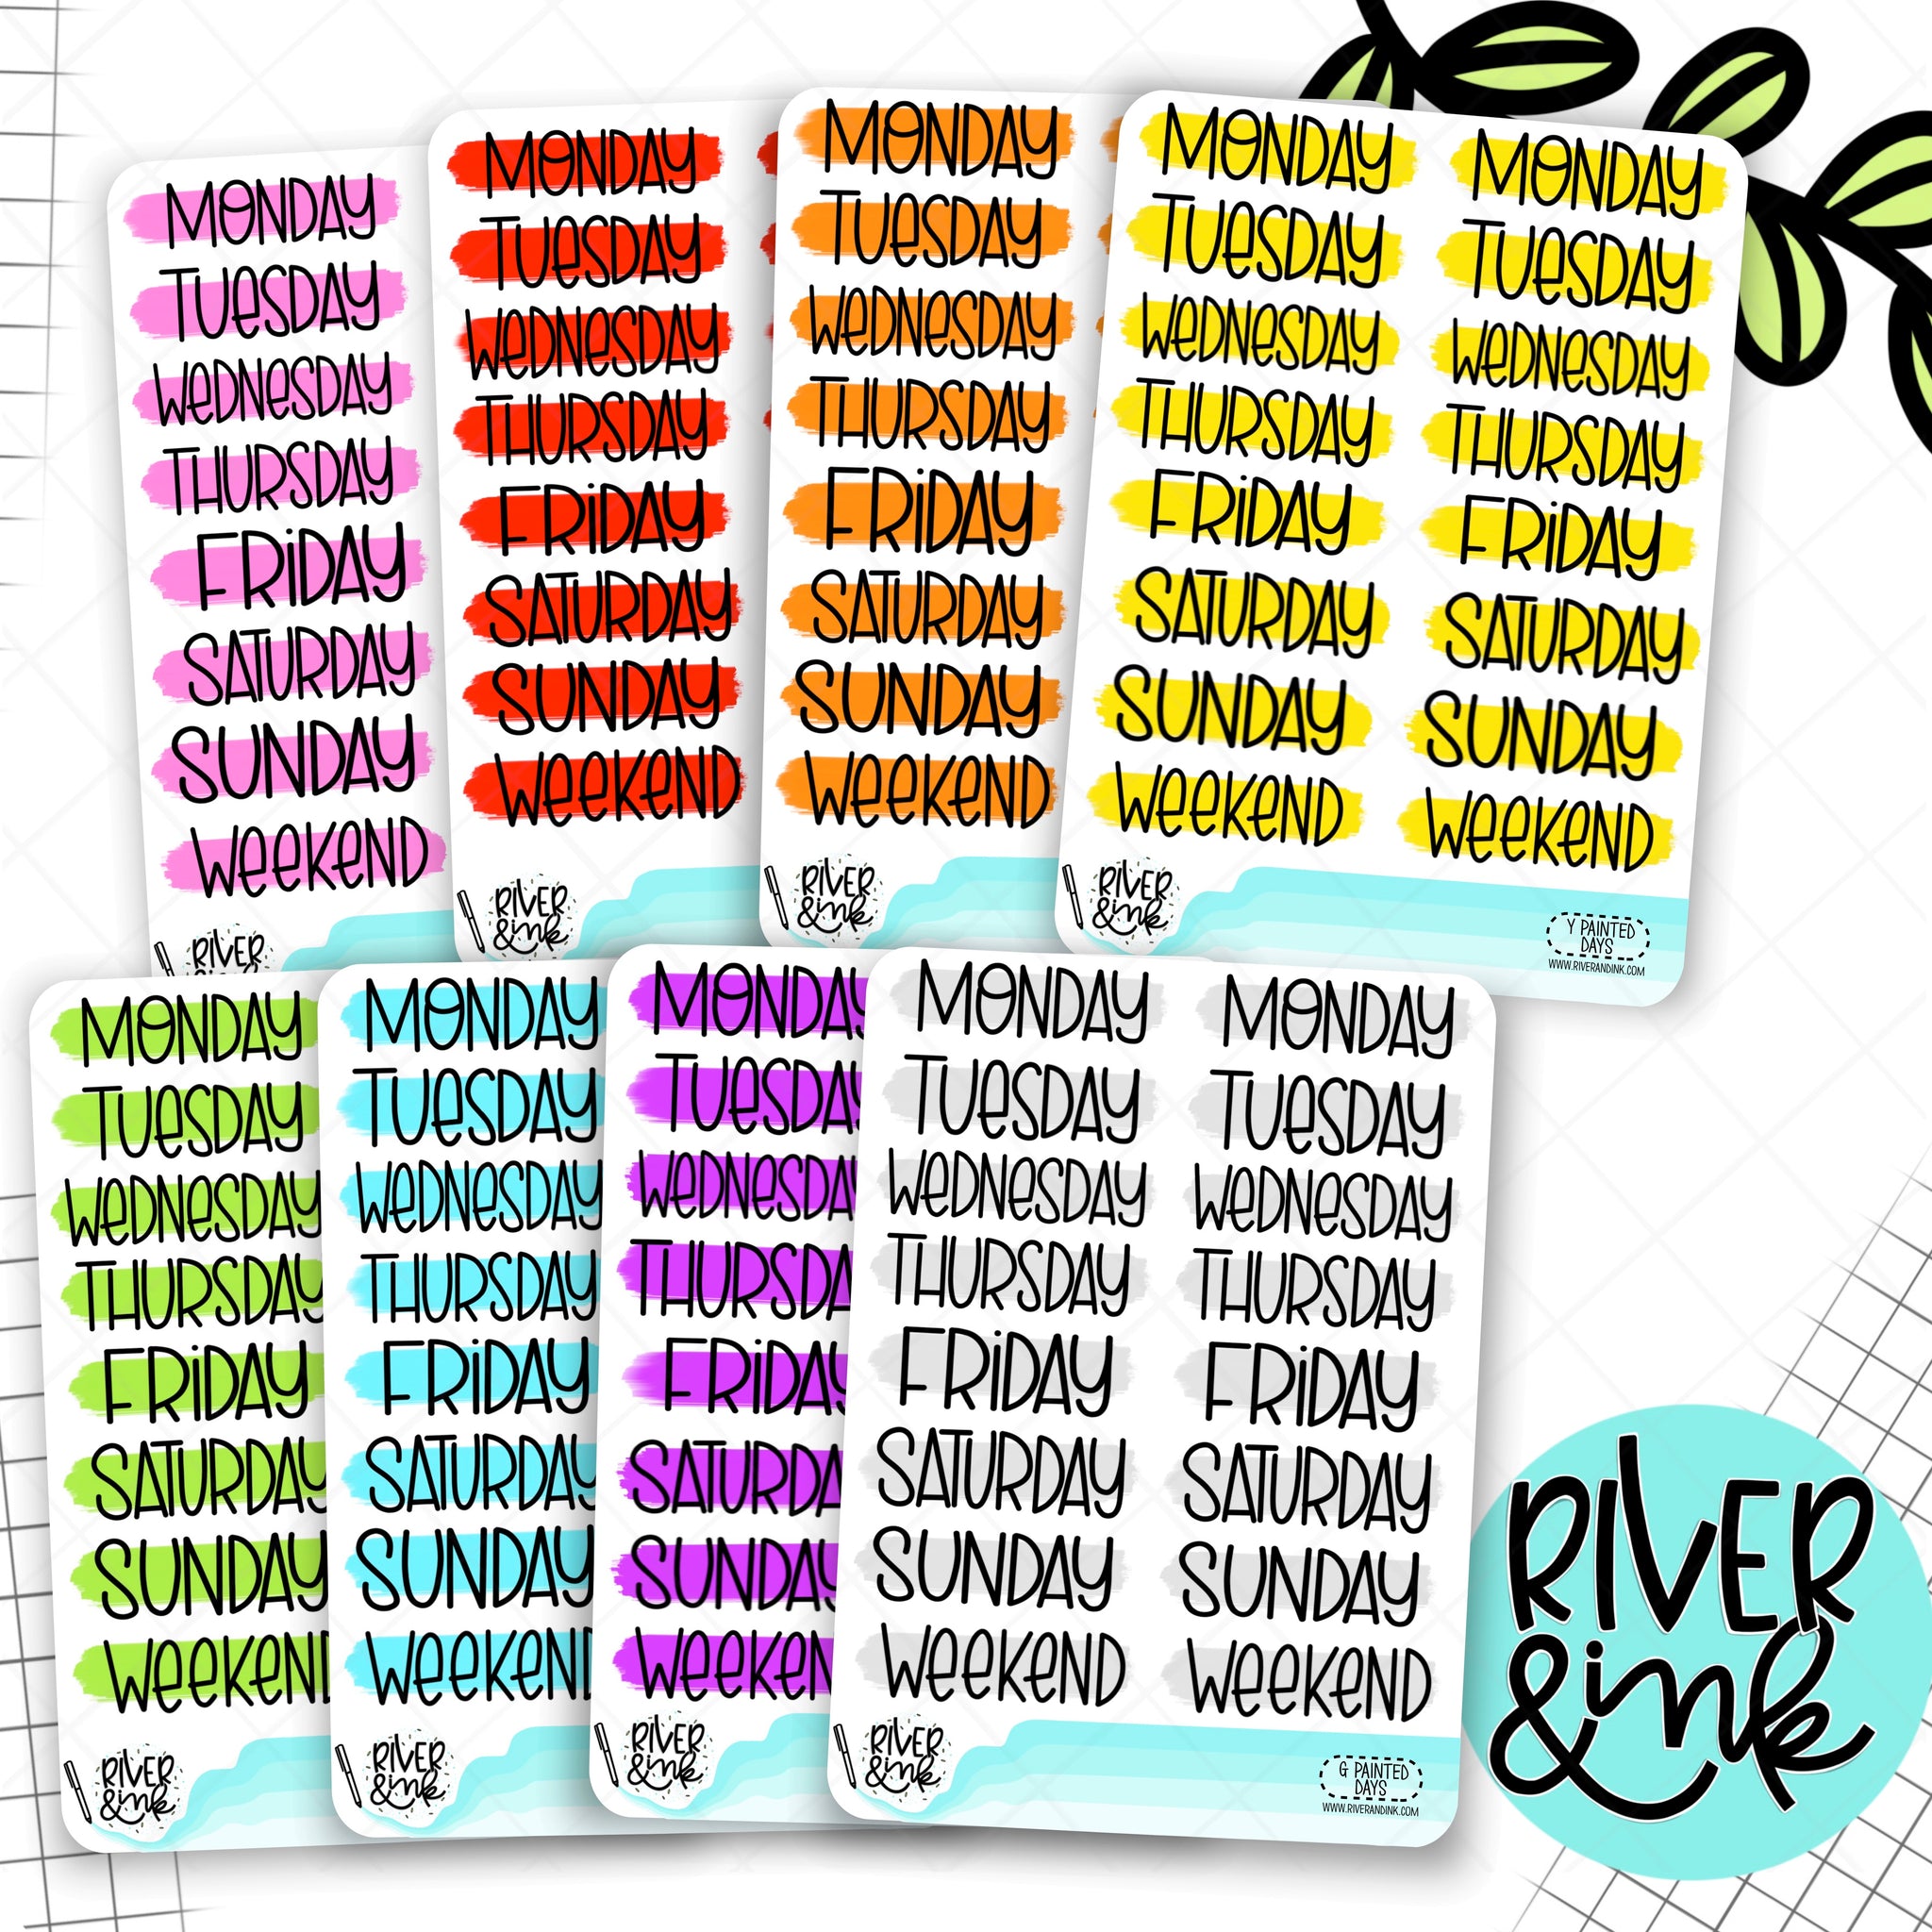 Rainbows Days of the Week Planner Stickers Spring DOTW Stickers Colorful  Daily Stickers Seasonal Planner Stickersr 